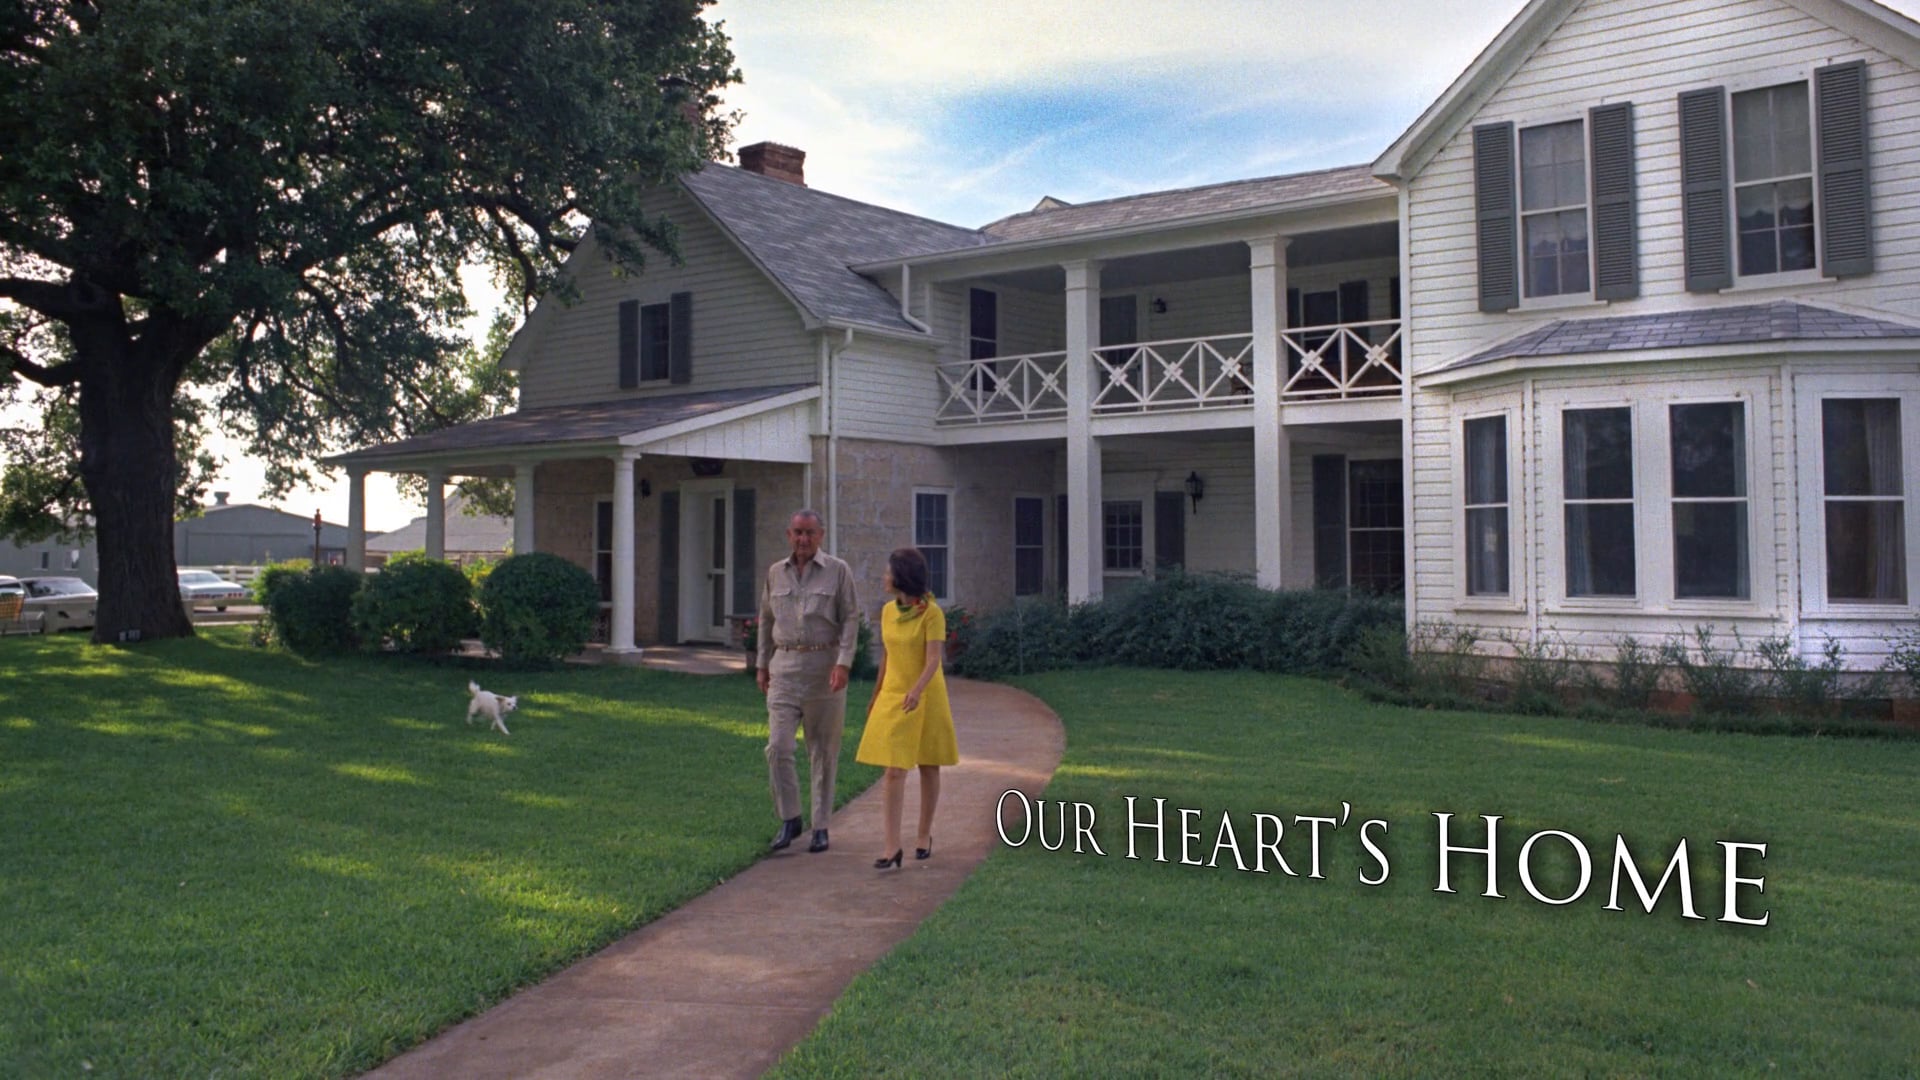 Our Heart's Home: Lyndon and Lady Bird Johnson's Texas While House